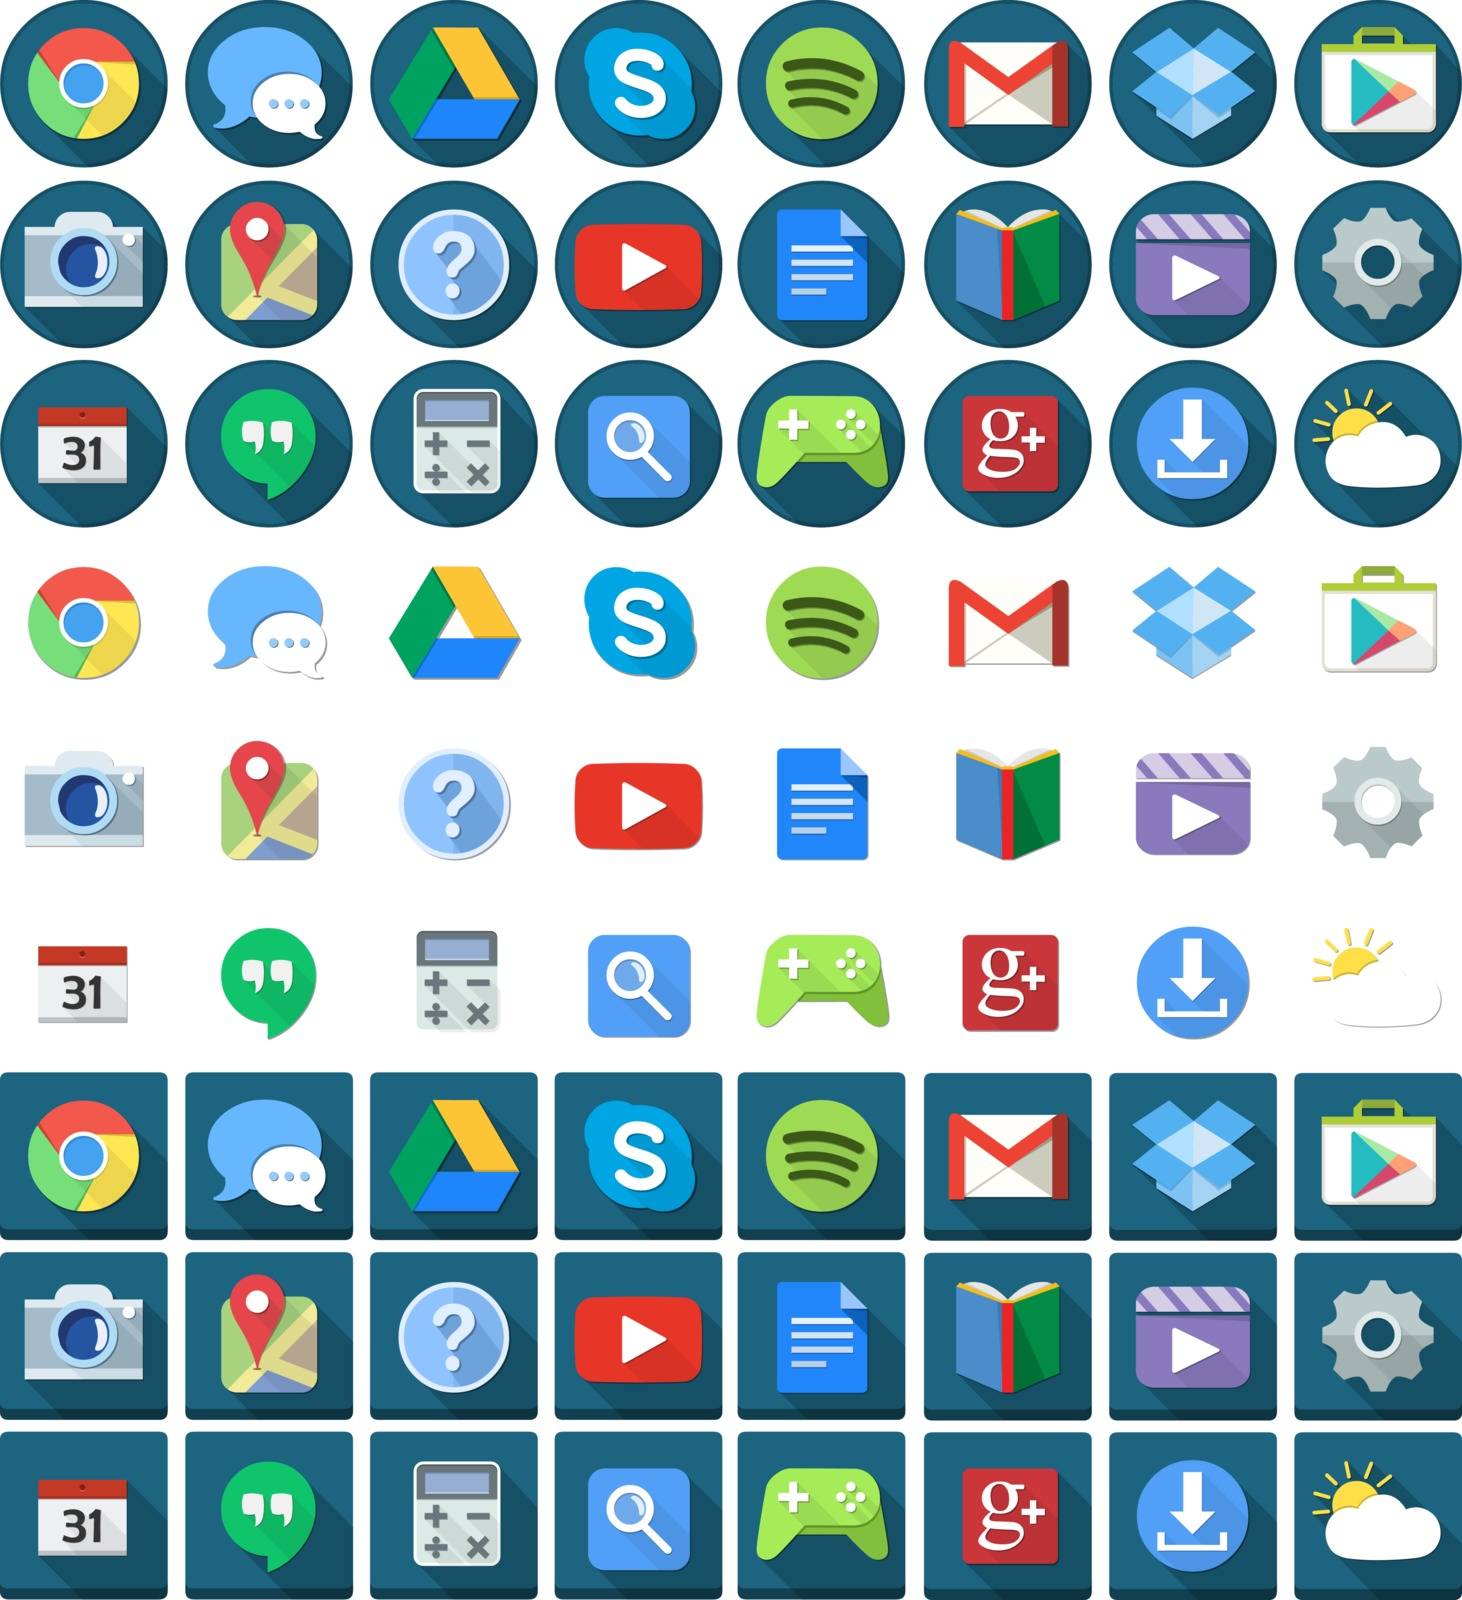 Flat Circle Square Android Icons by LironPeer